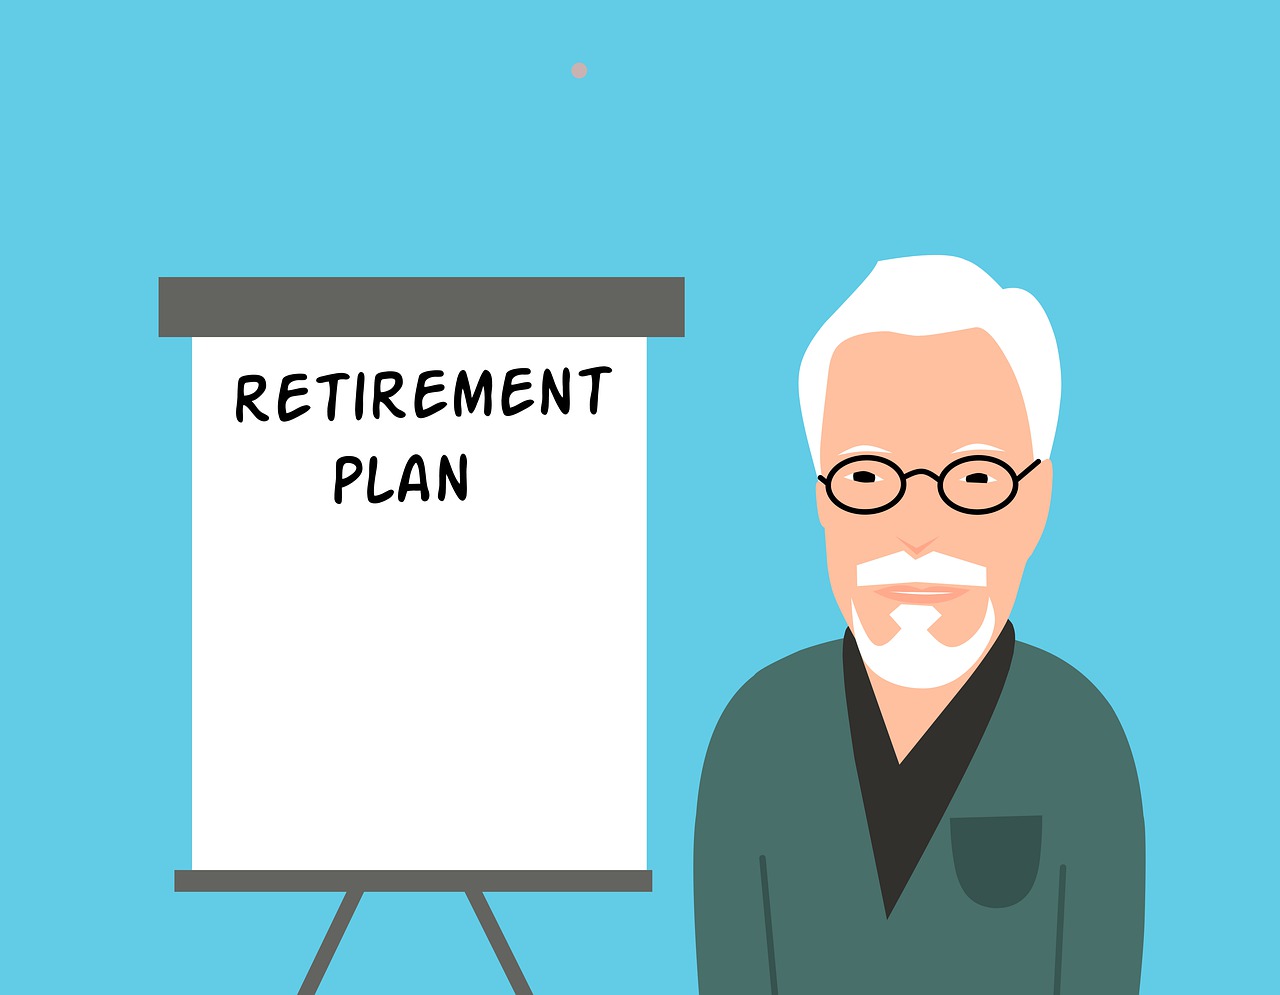 Do You Specialize In Any Particular Areas, Like Retirement Or Tax Planning?